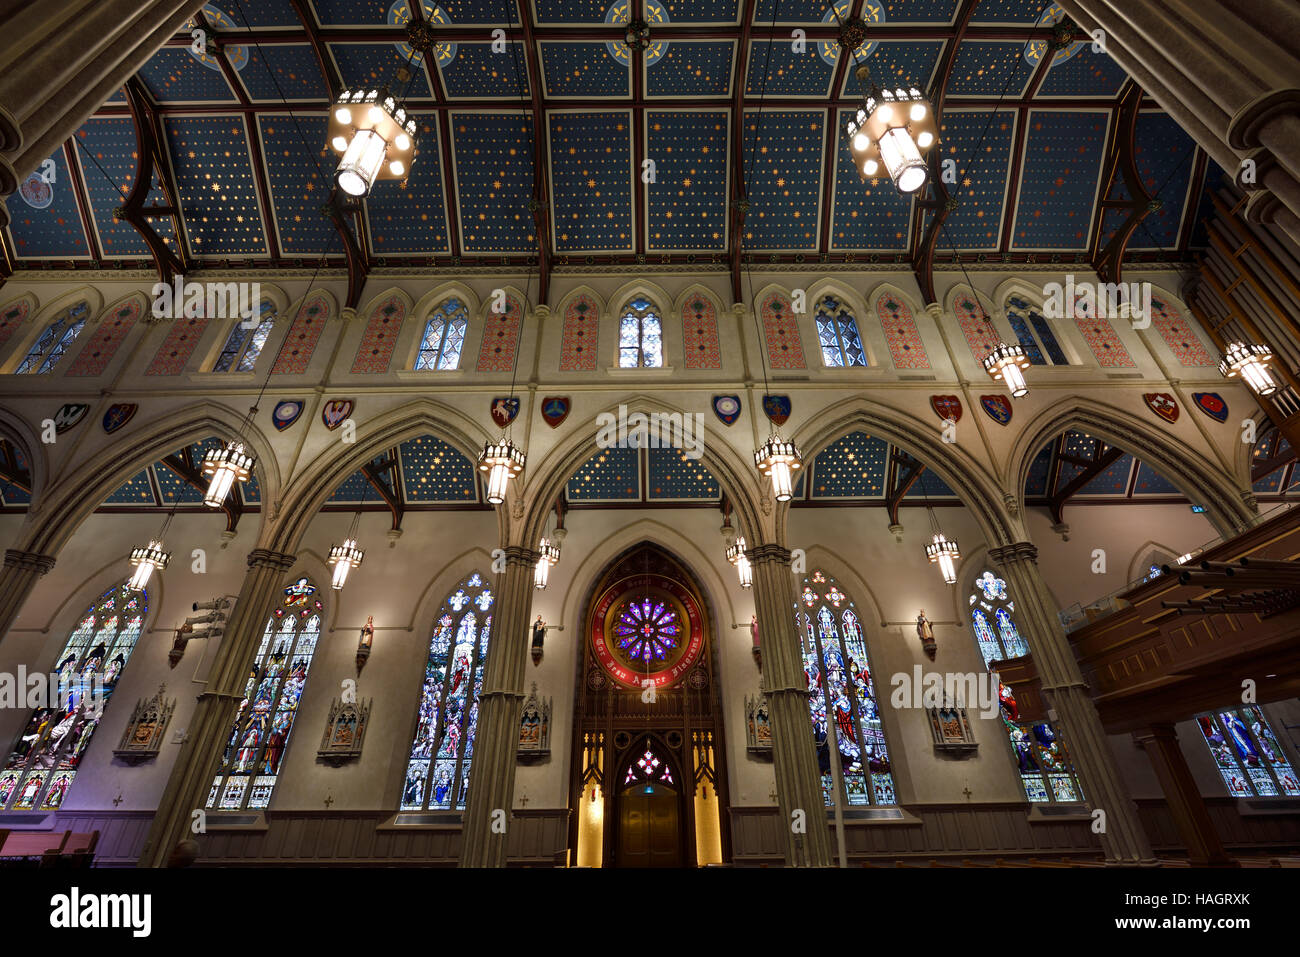 Sacred Heart of Jesus side of St Michael's renovated Cathedral Toronto with starry ceiling Stock Photo